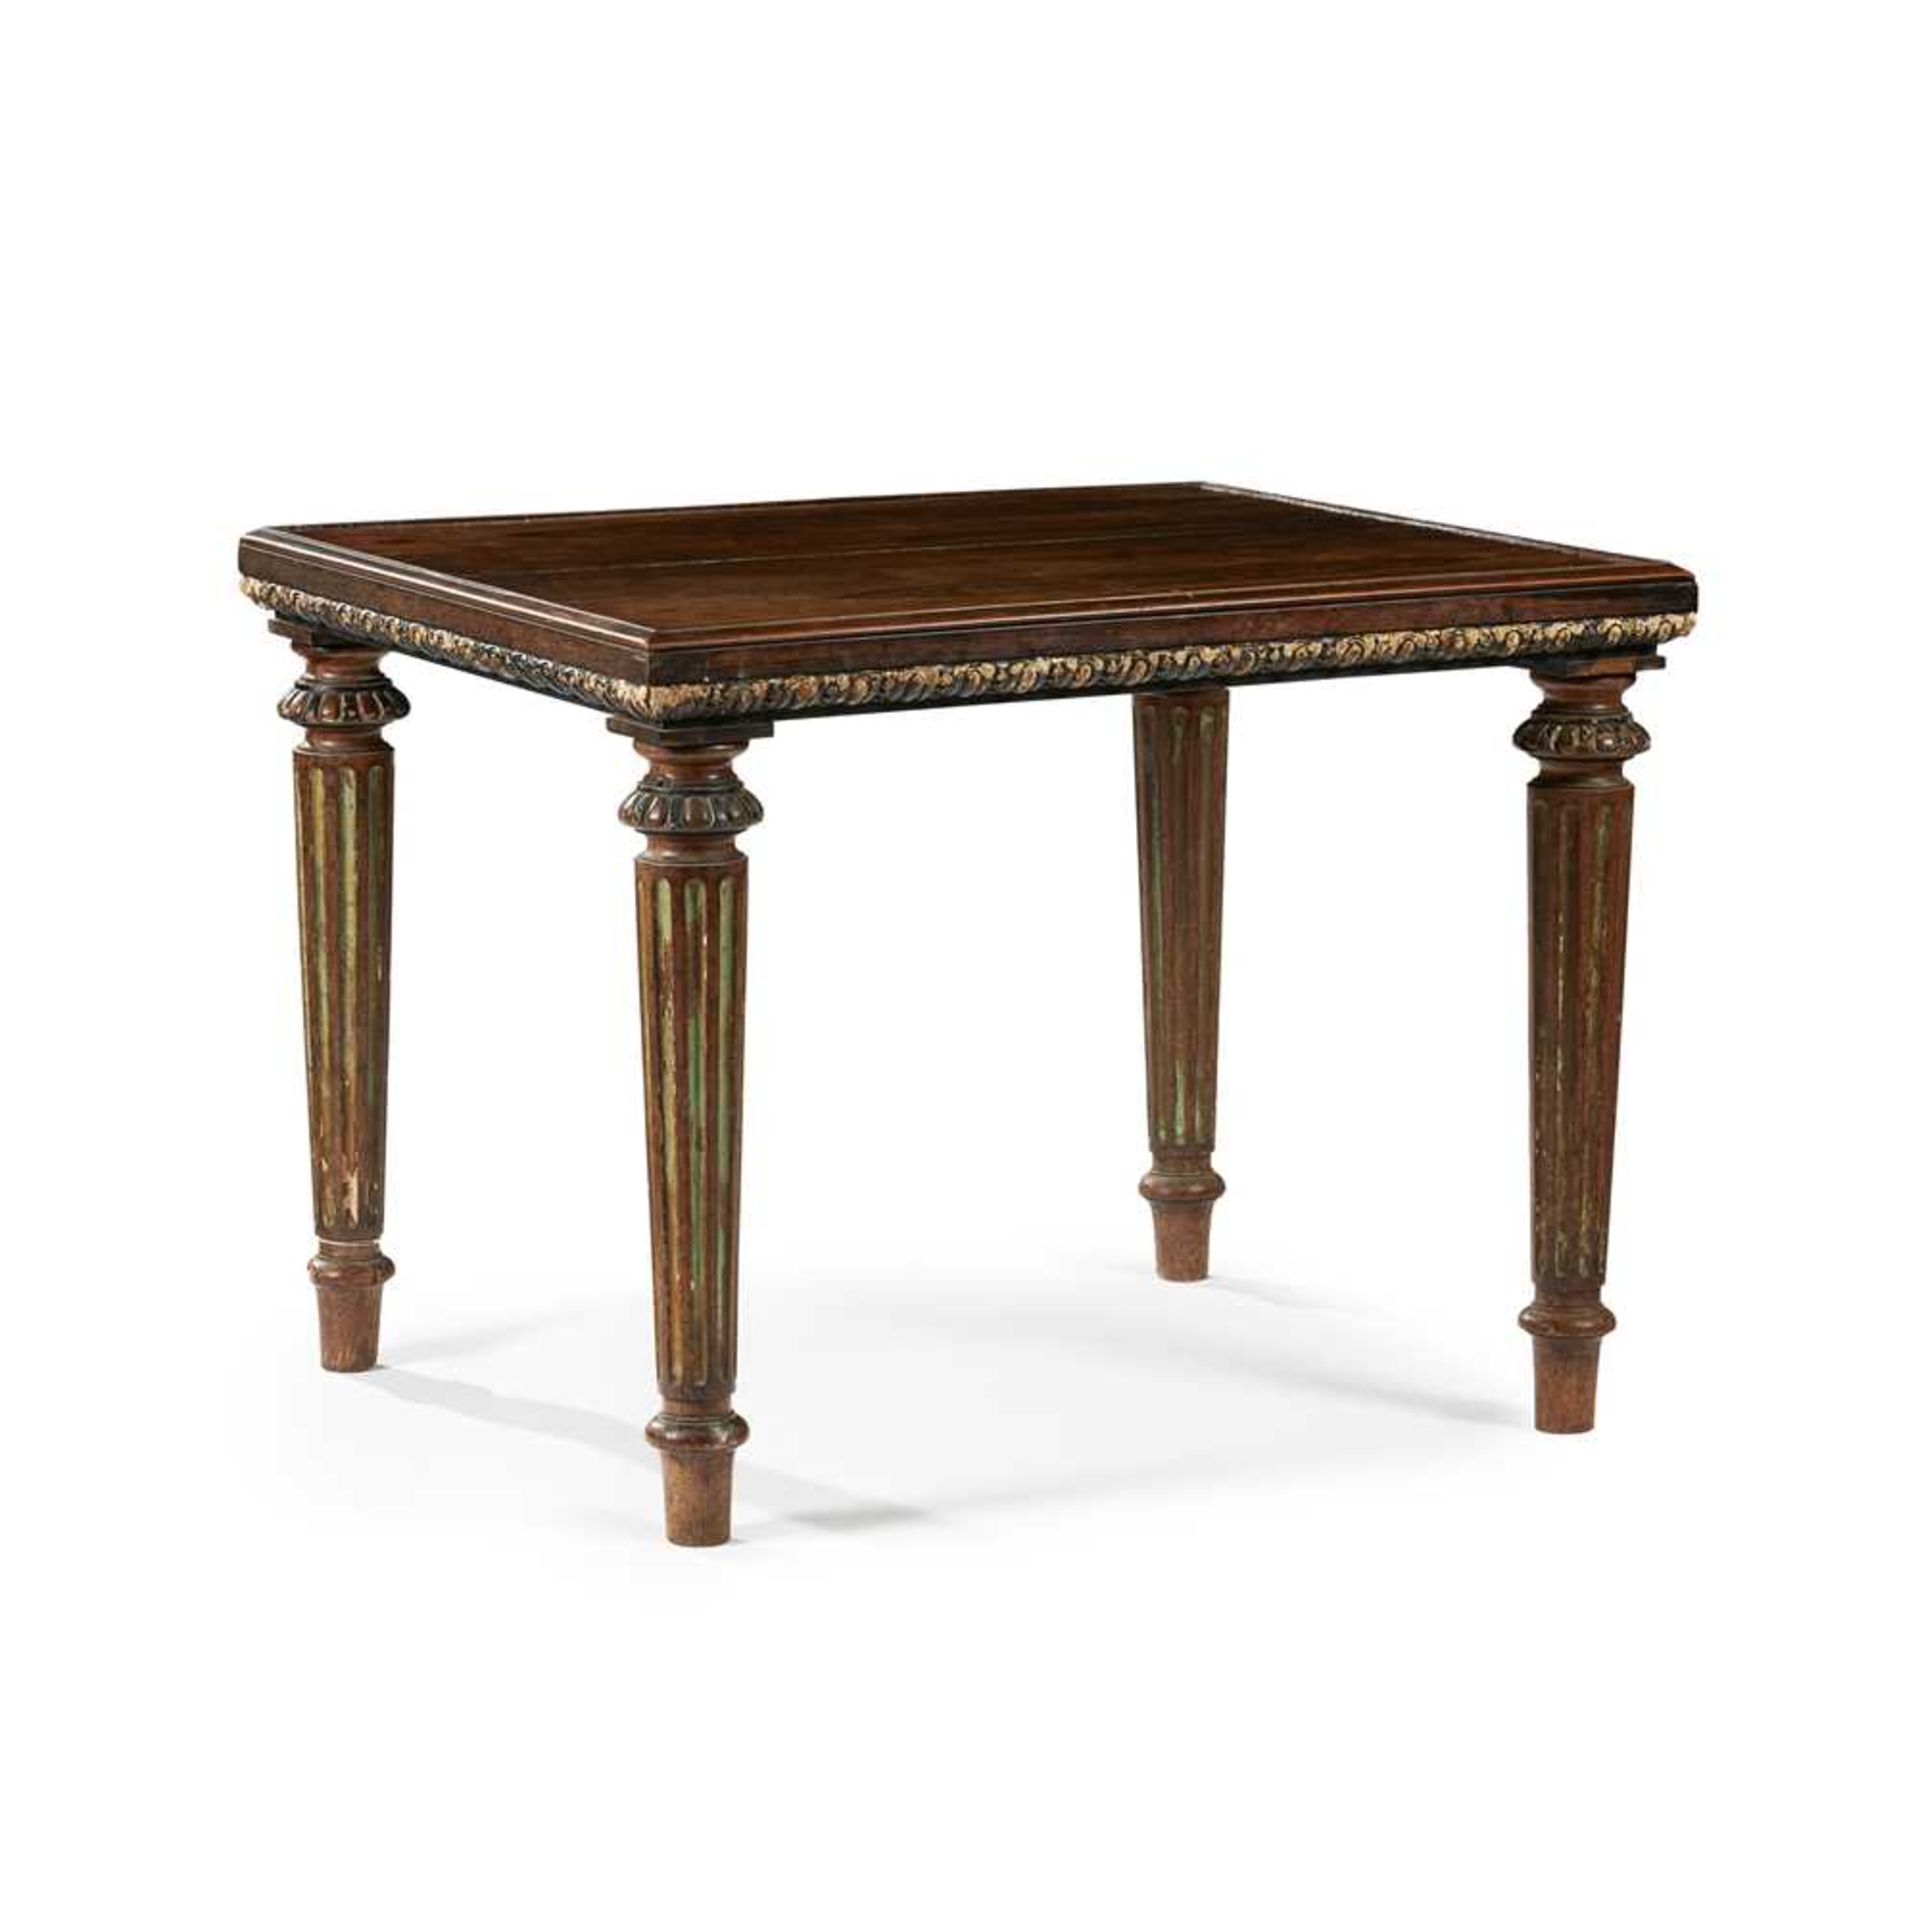 GEORGE III ROSEWOOD, PARCEL GILT, EBONISED AND PAINTED CENTRE TABLE LATE 18TH CENTURY